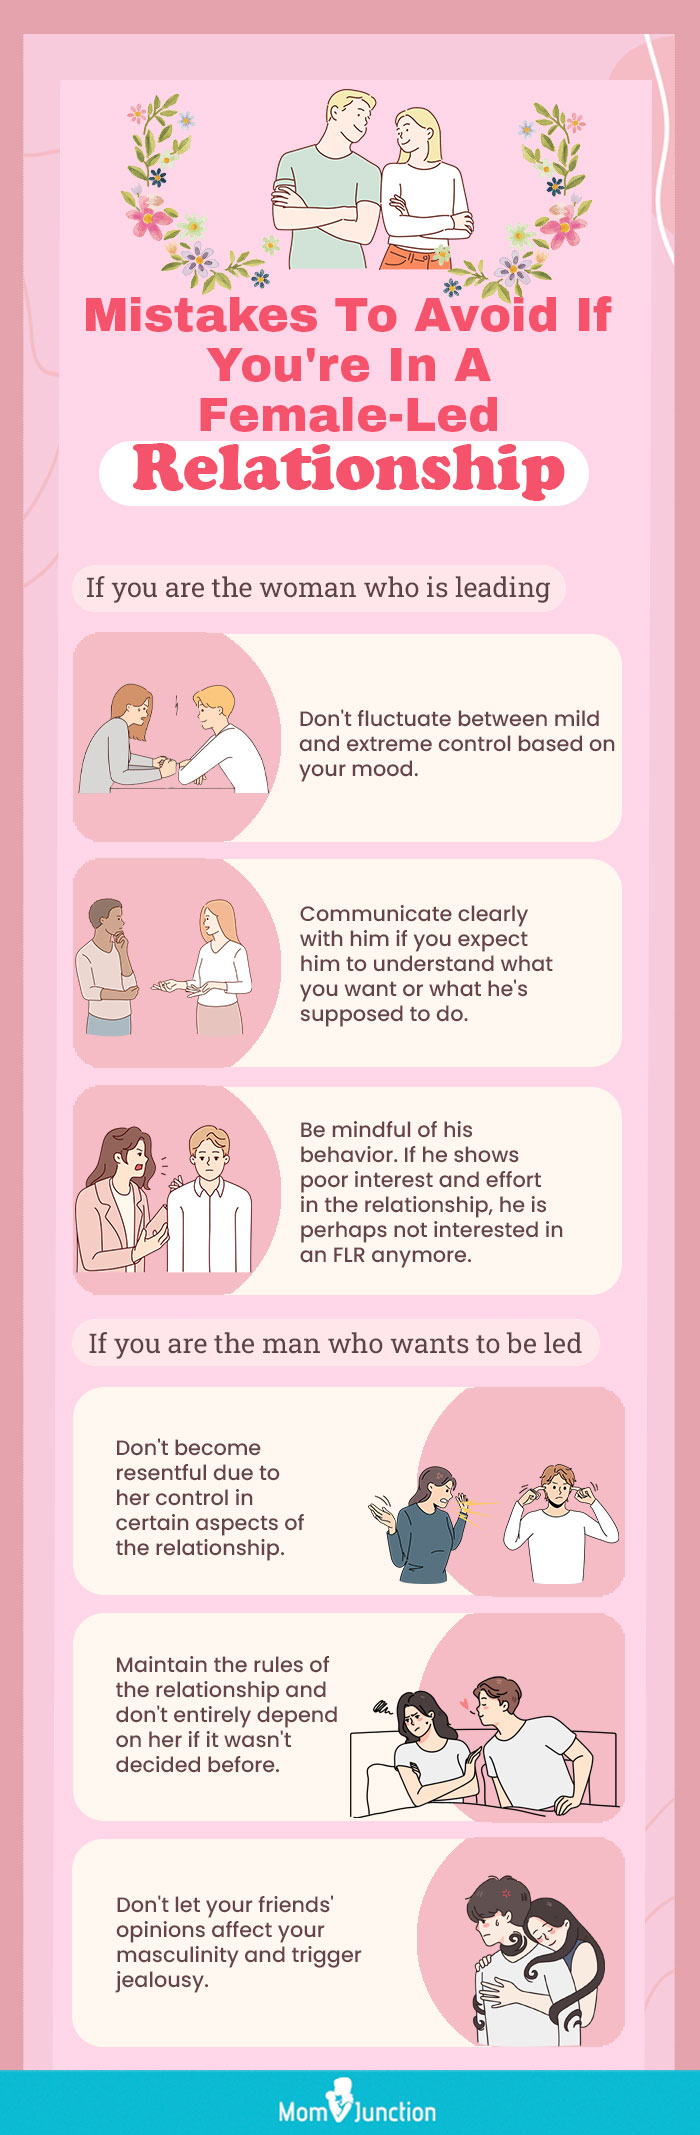 how not to behave in a female-led relationship [infographic]